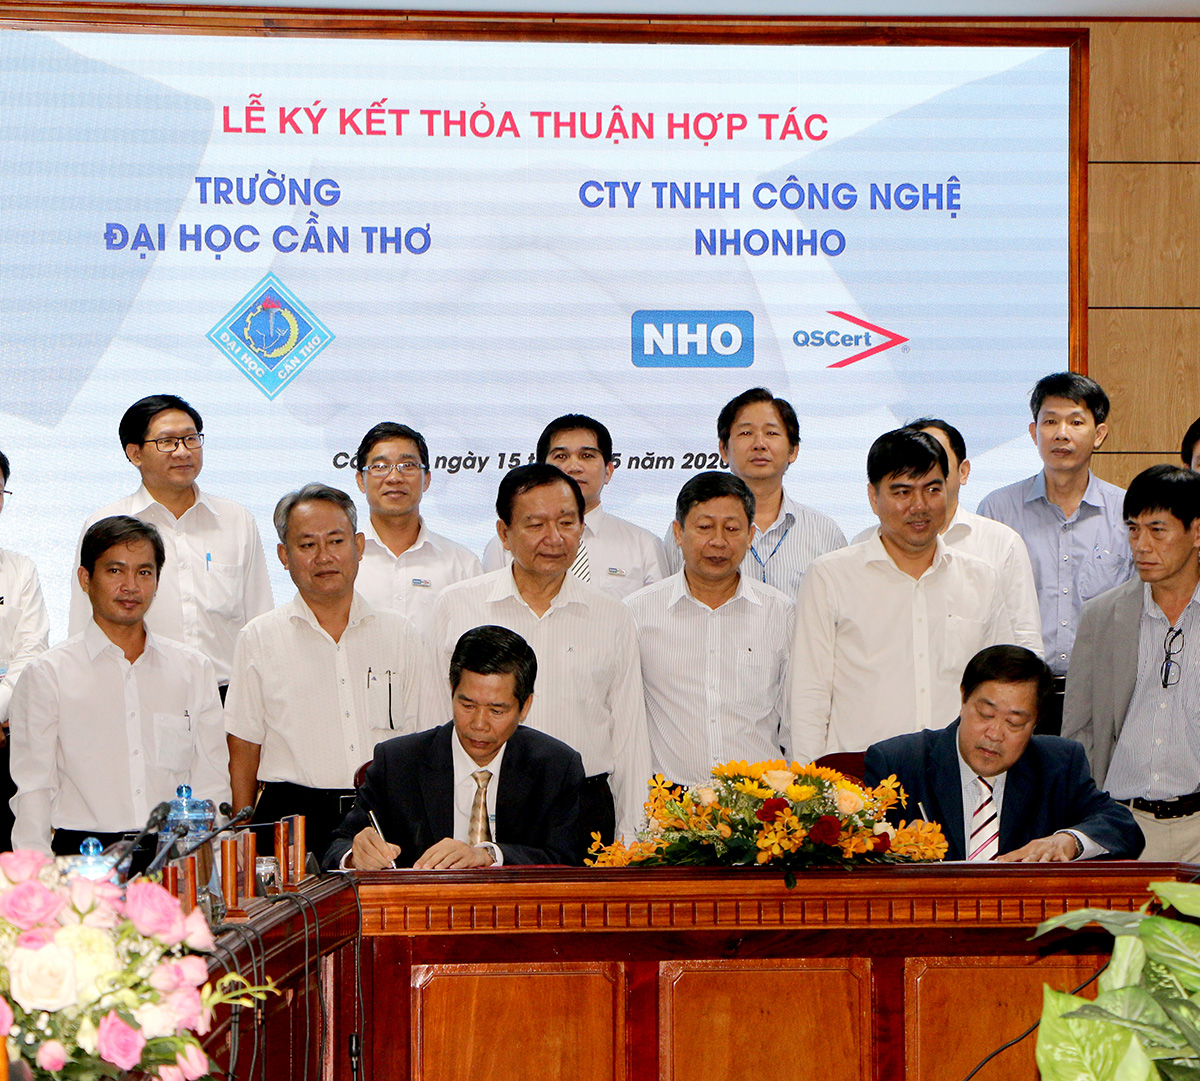 Can Tho University and NHONHO technology company are partnering to explore how intermediaries can broker innovations and create the partnerships that drive Vietnam’s future socio-economic growth.